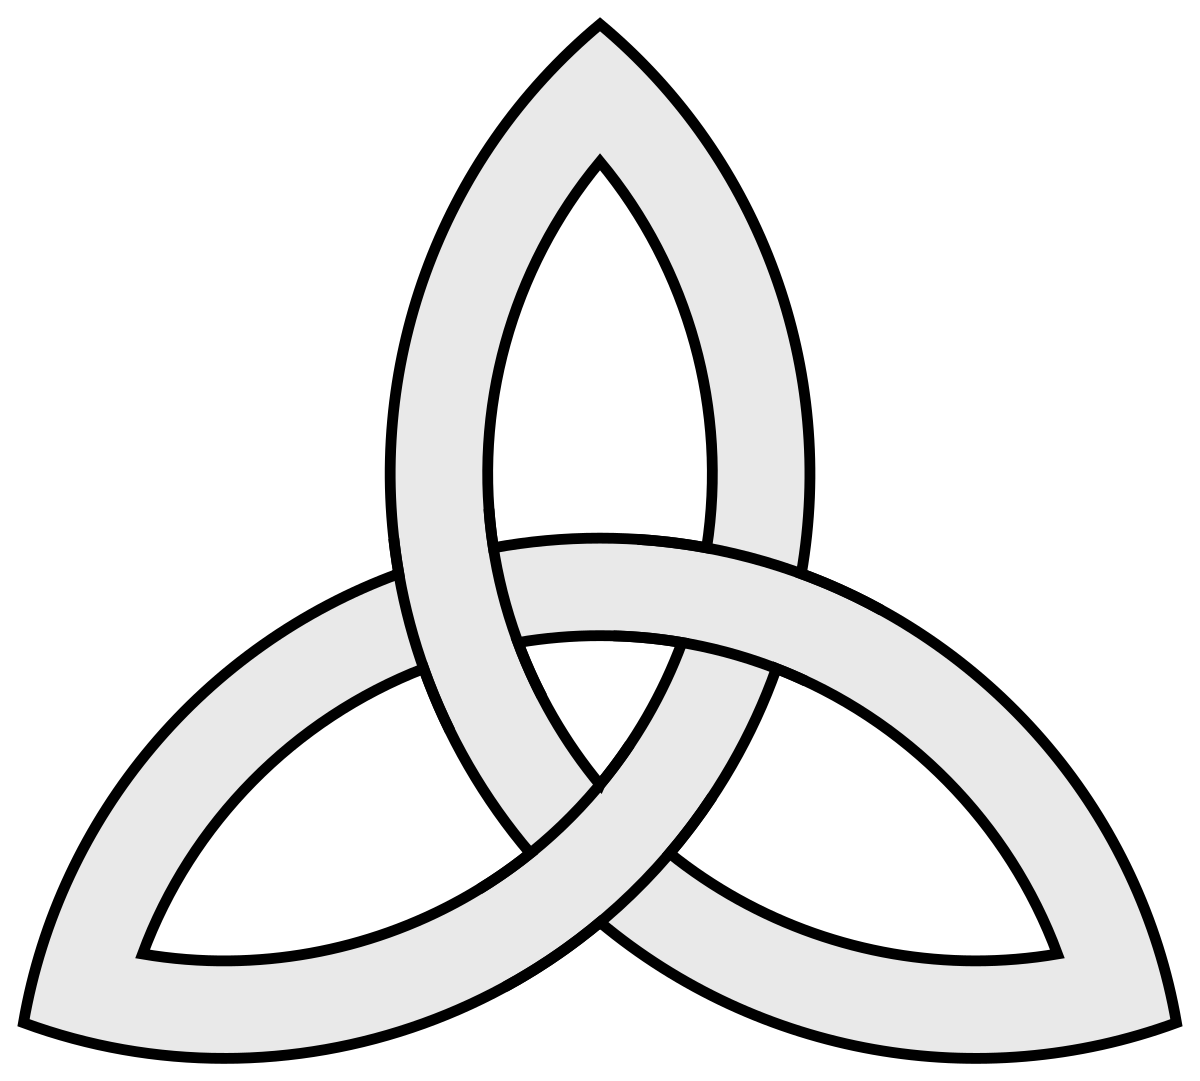 Small Triquetra temporary tattoo located on the chest.